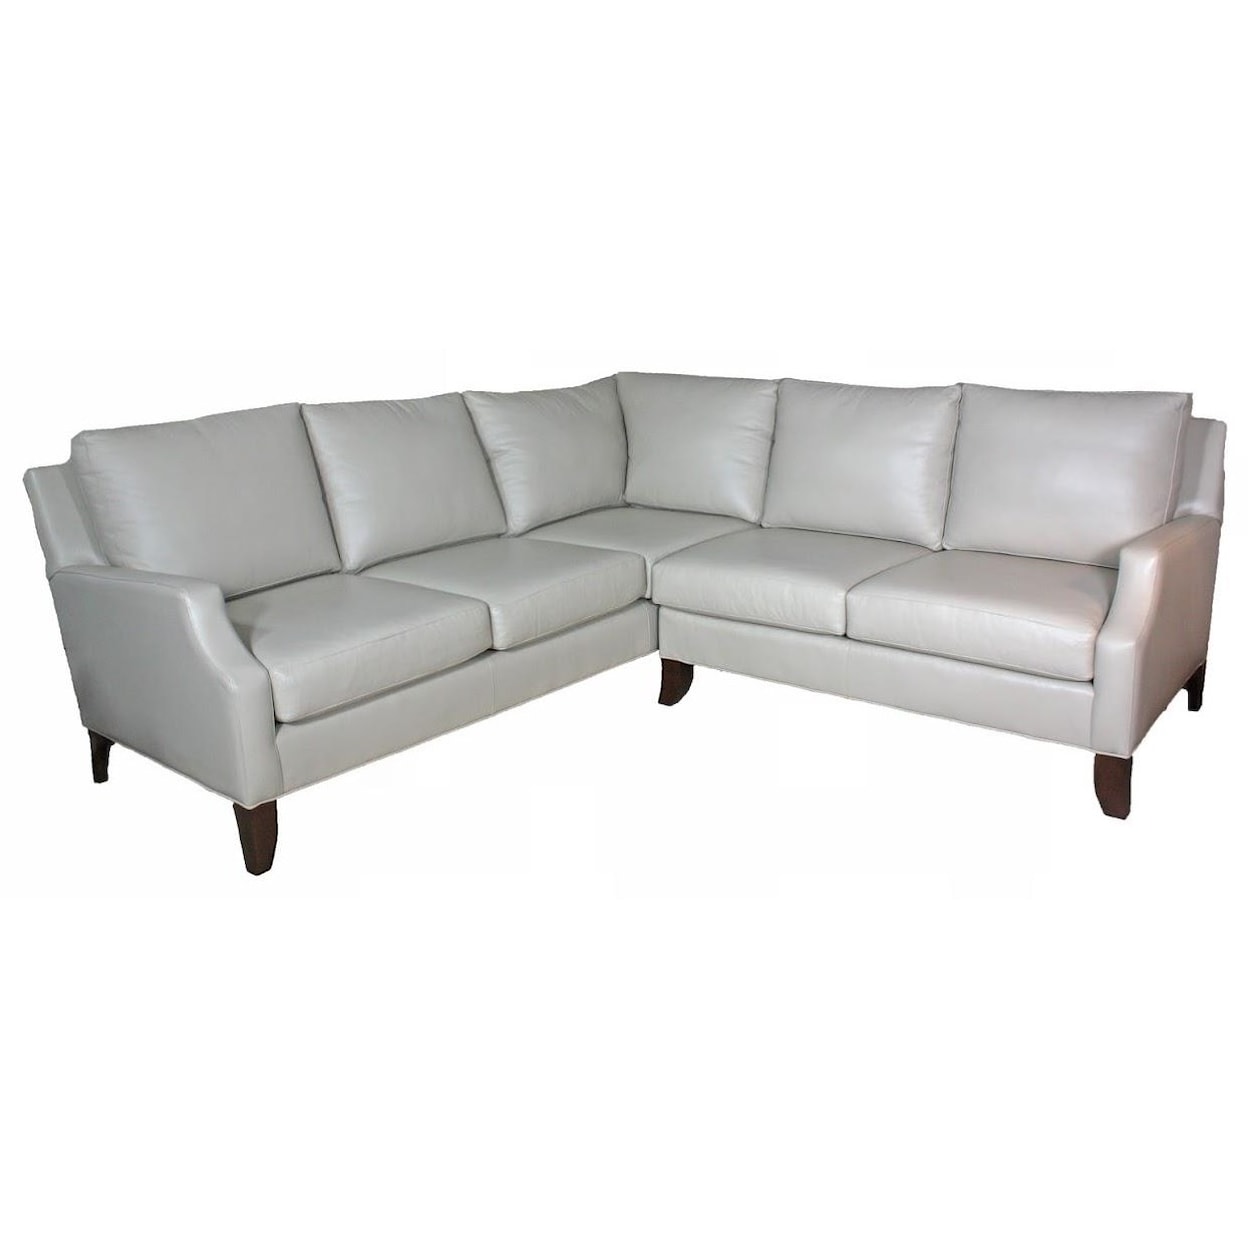 McKinley Leather Cope Traditional 2 PC Sectional